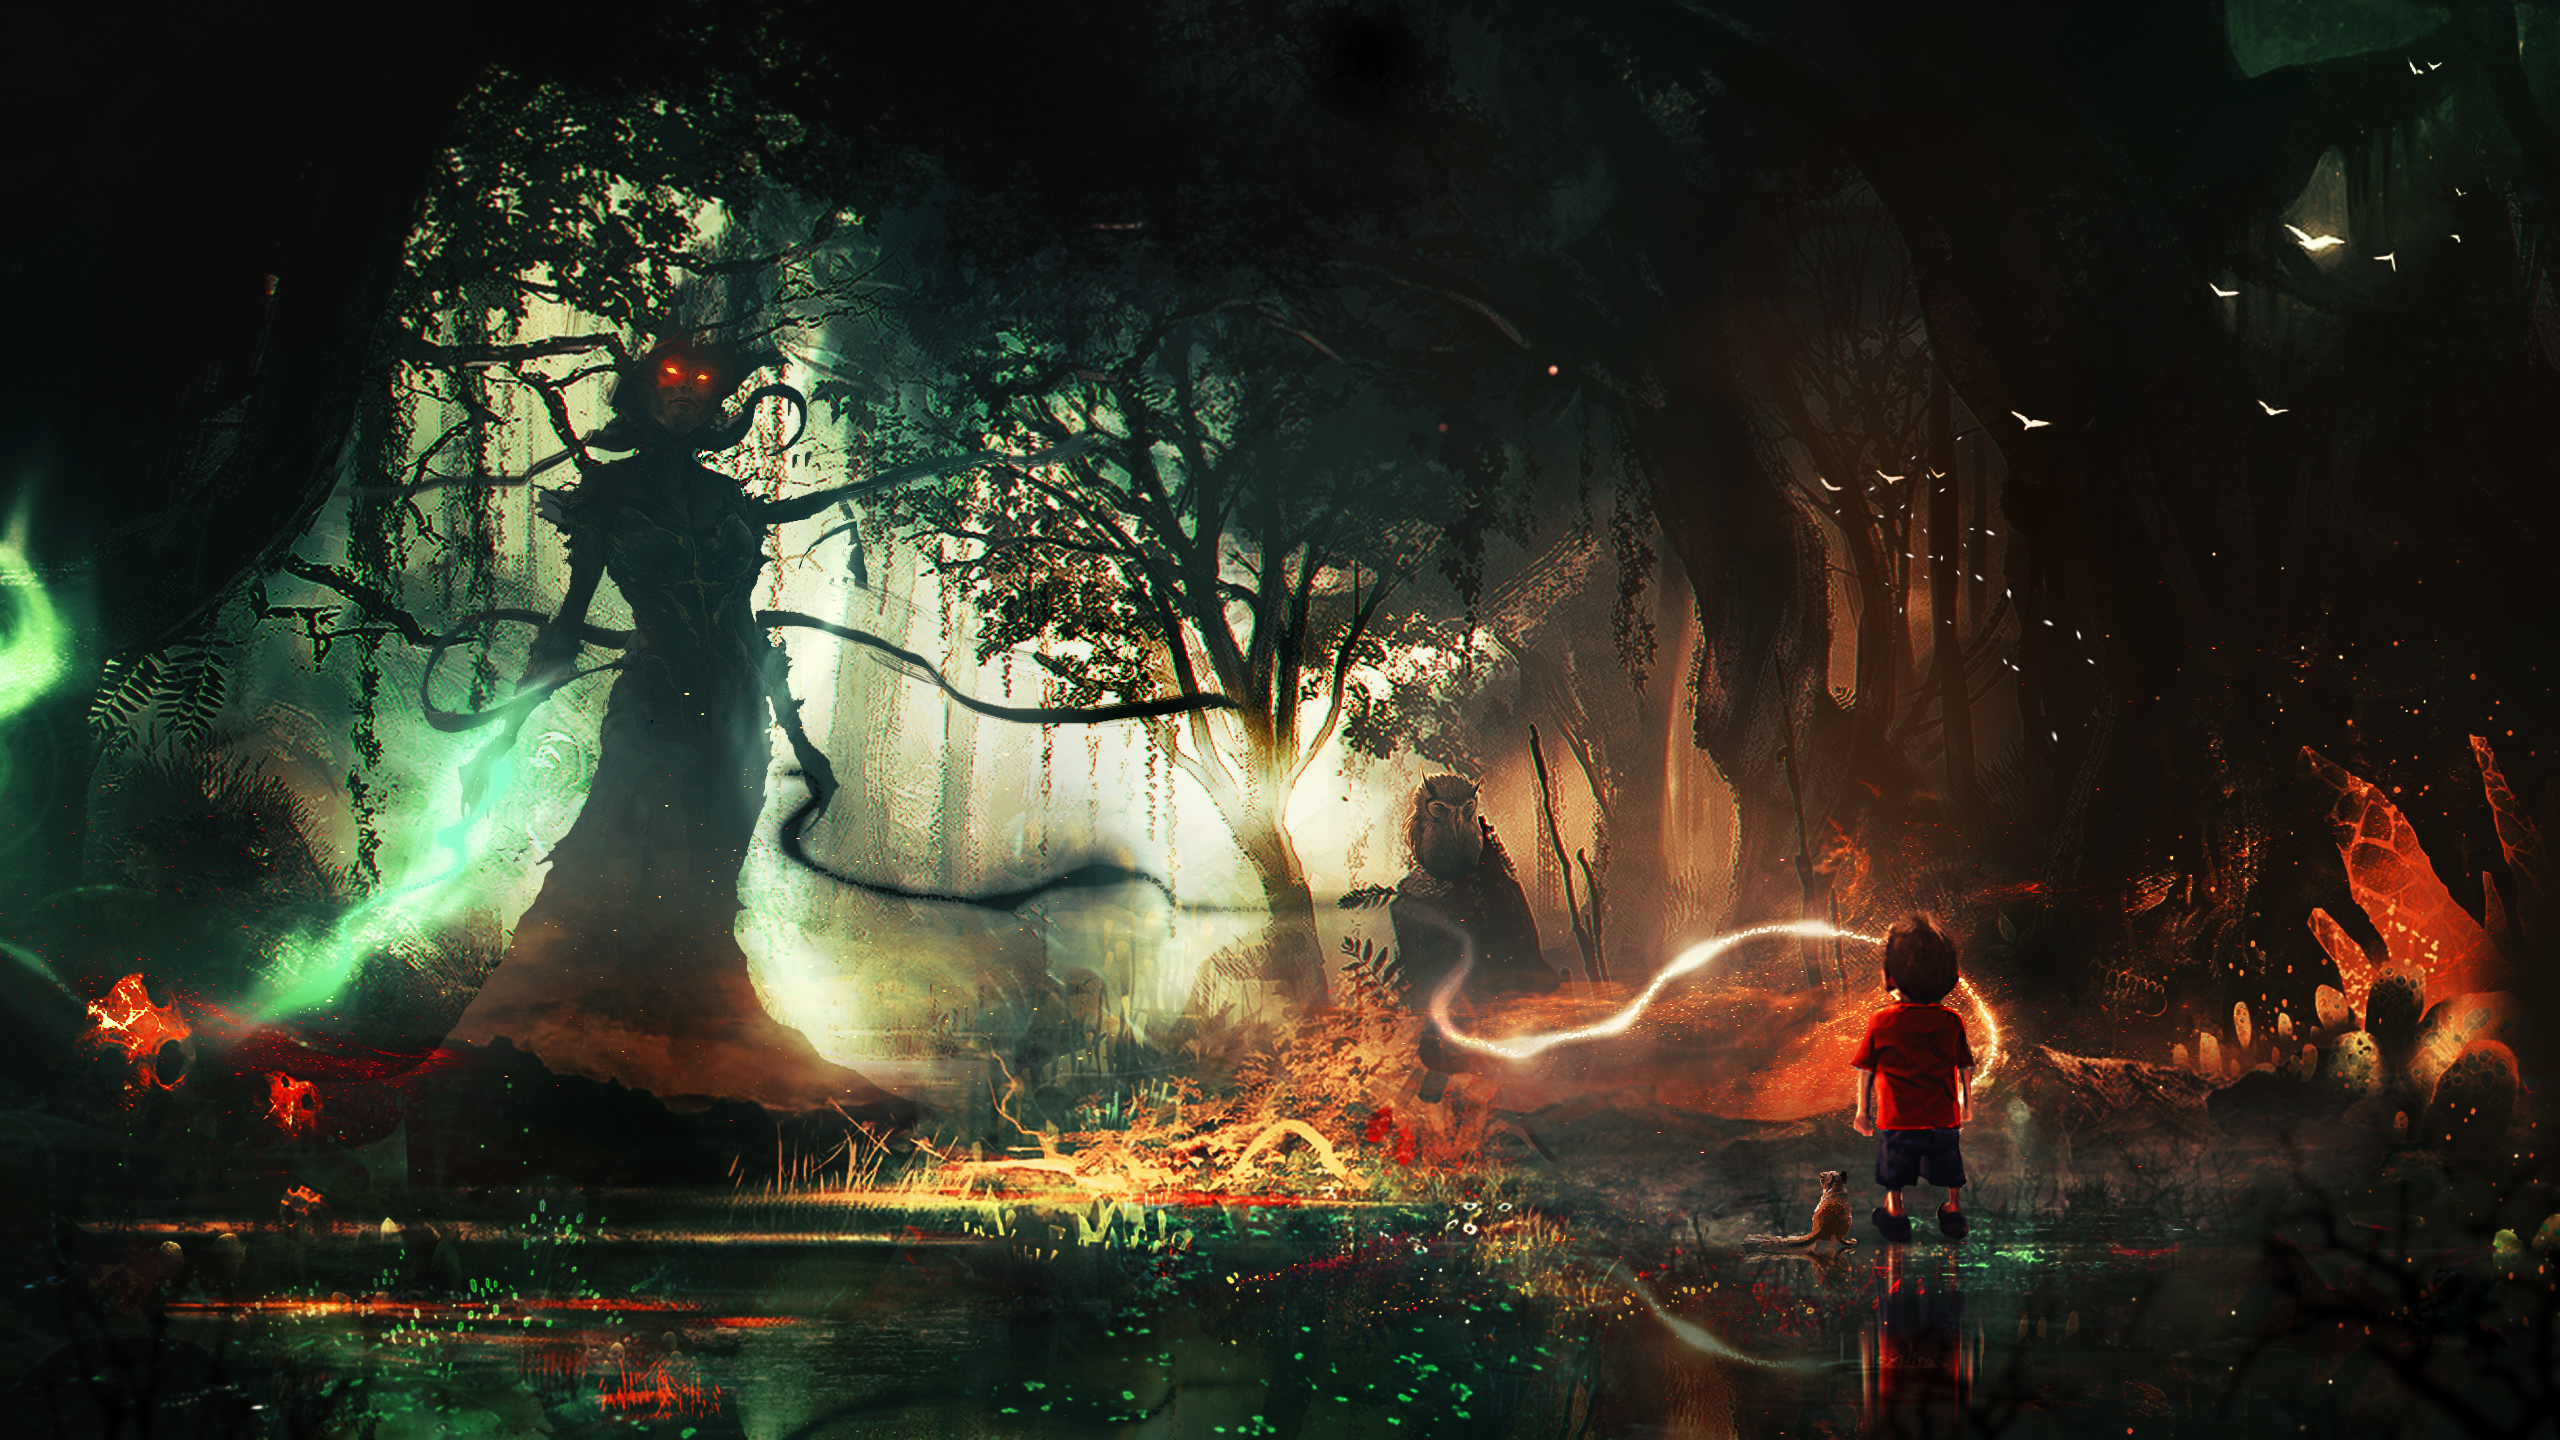 Image Boys Monsters Fantasy Fantasy Forest 2560x1440